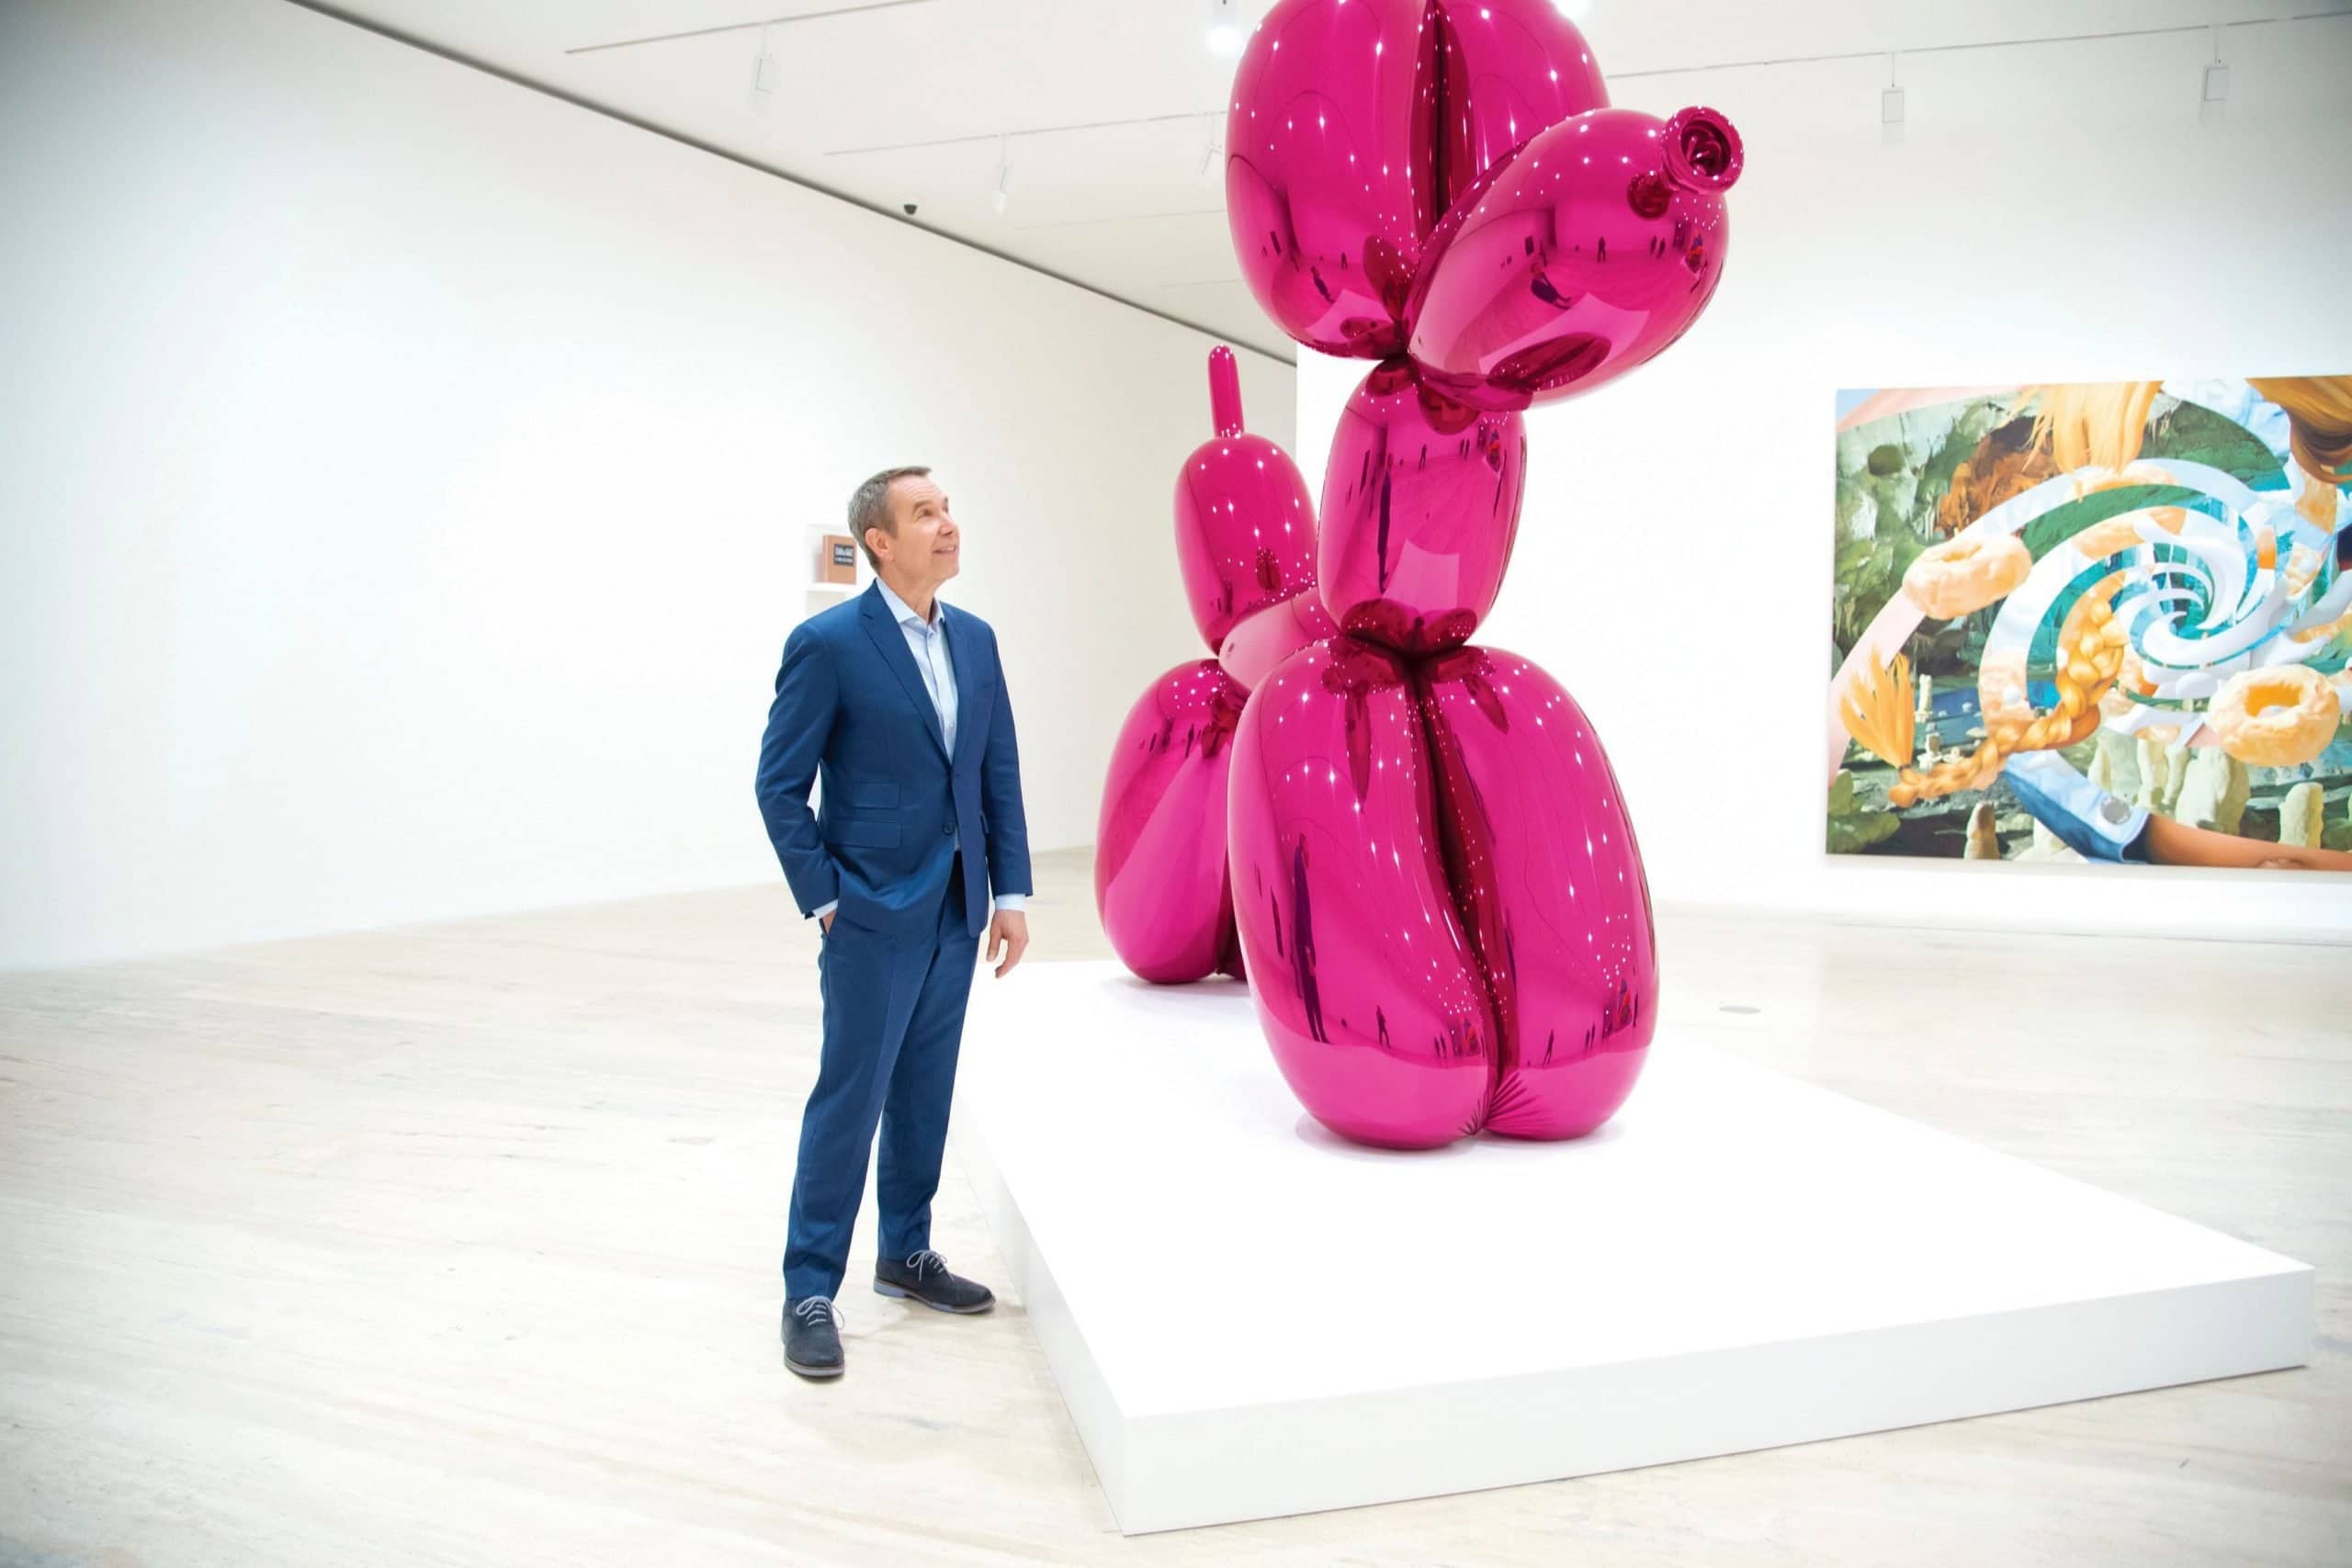 Jeff Koons with his sculpture and possible NFT subject